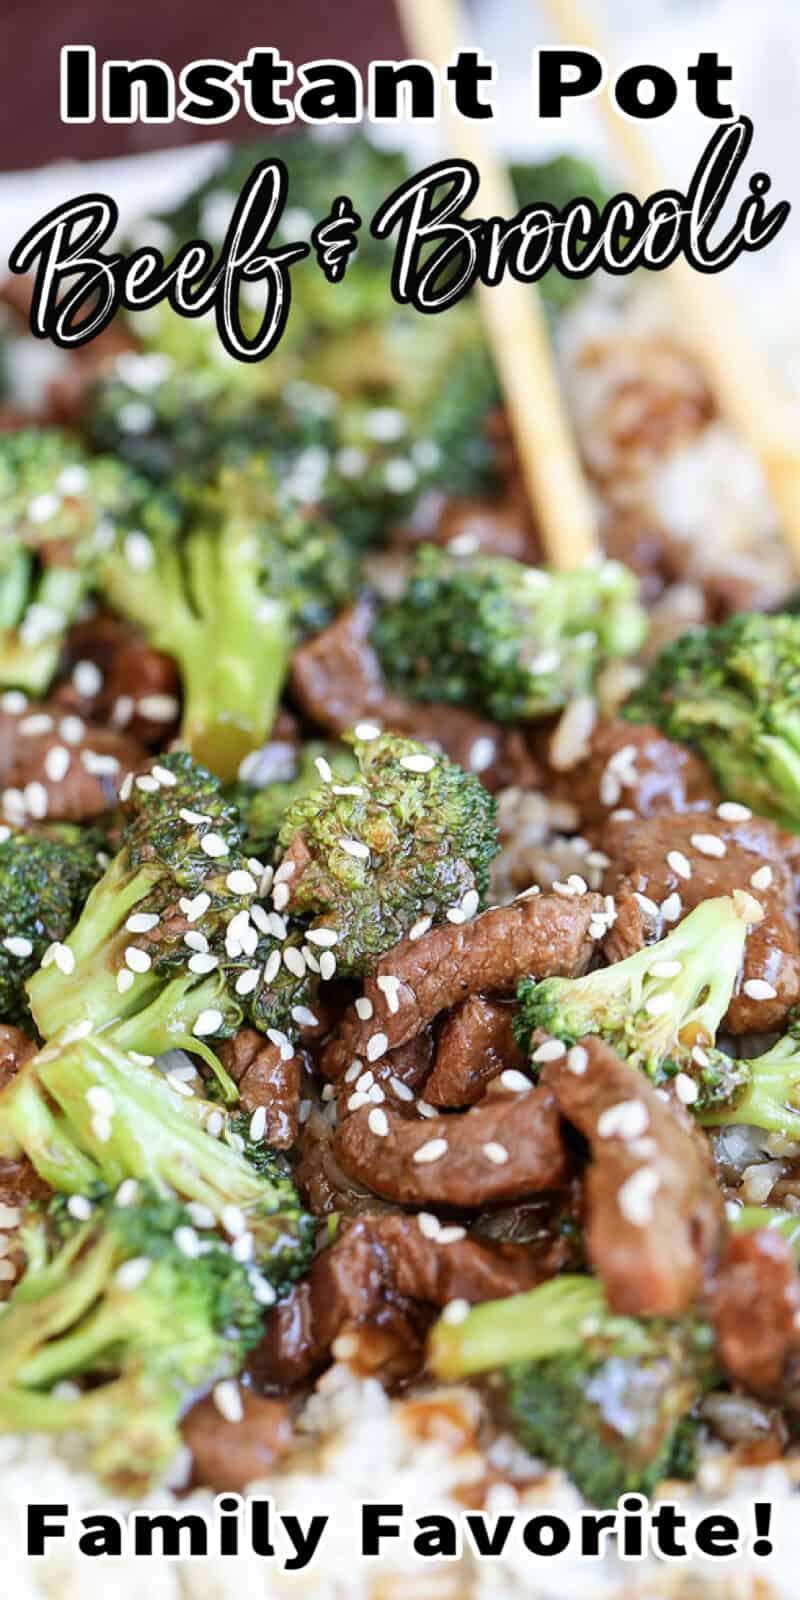 Instant Pot Beef and Broccoli (Quick and Easy)